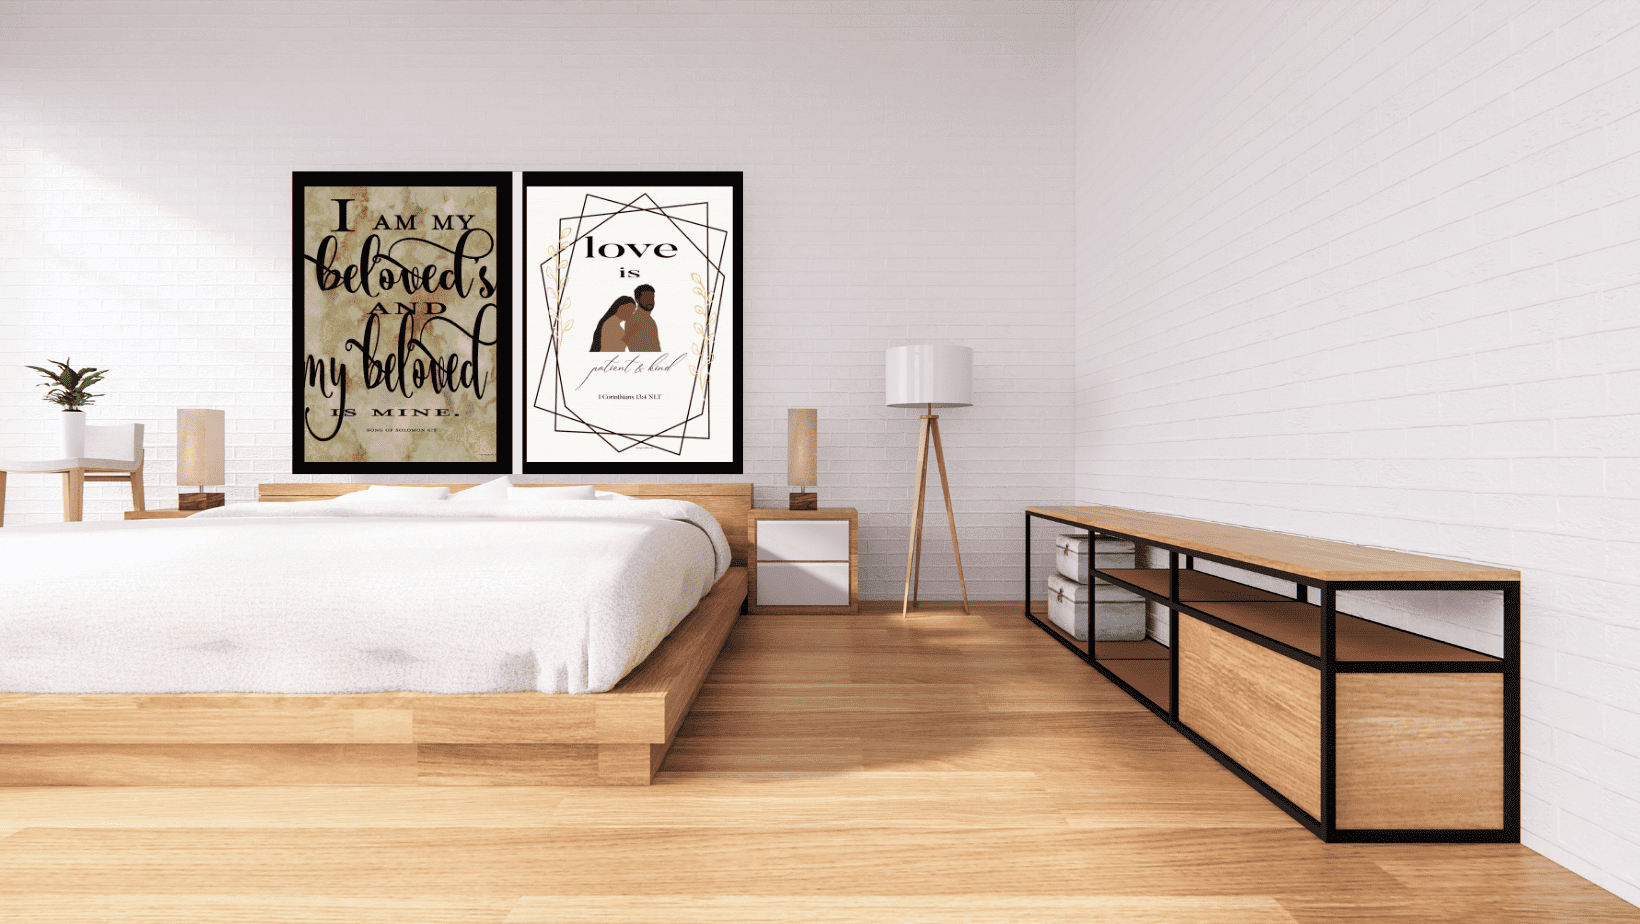 Song of Solomon 6:3 Art Print and 1 Corinthians 13:4 in bedroom above bed